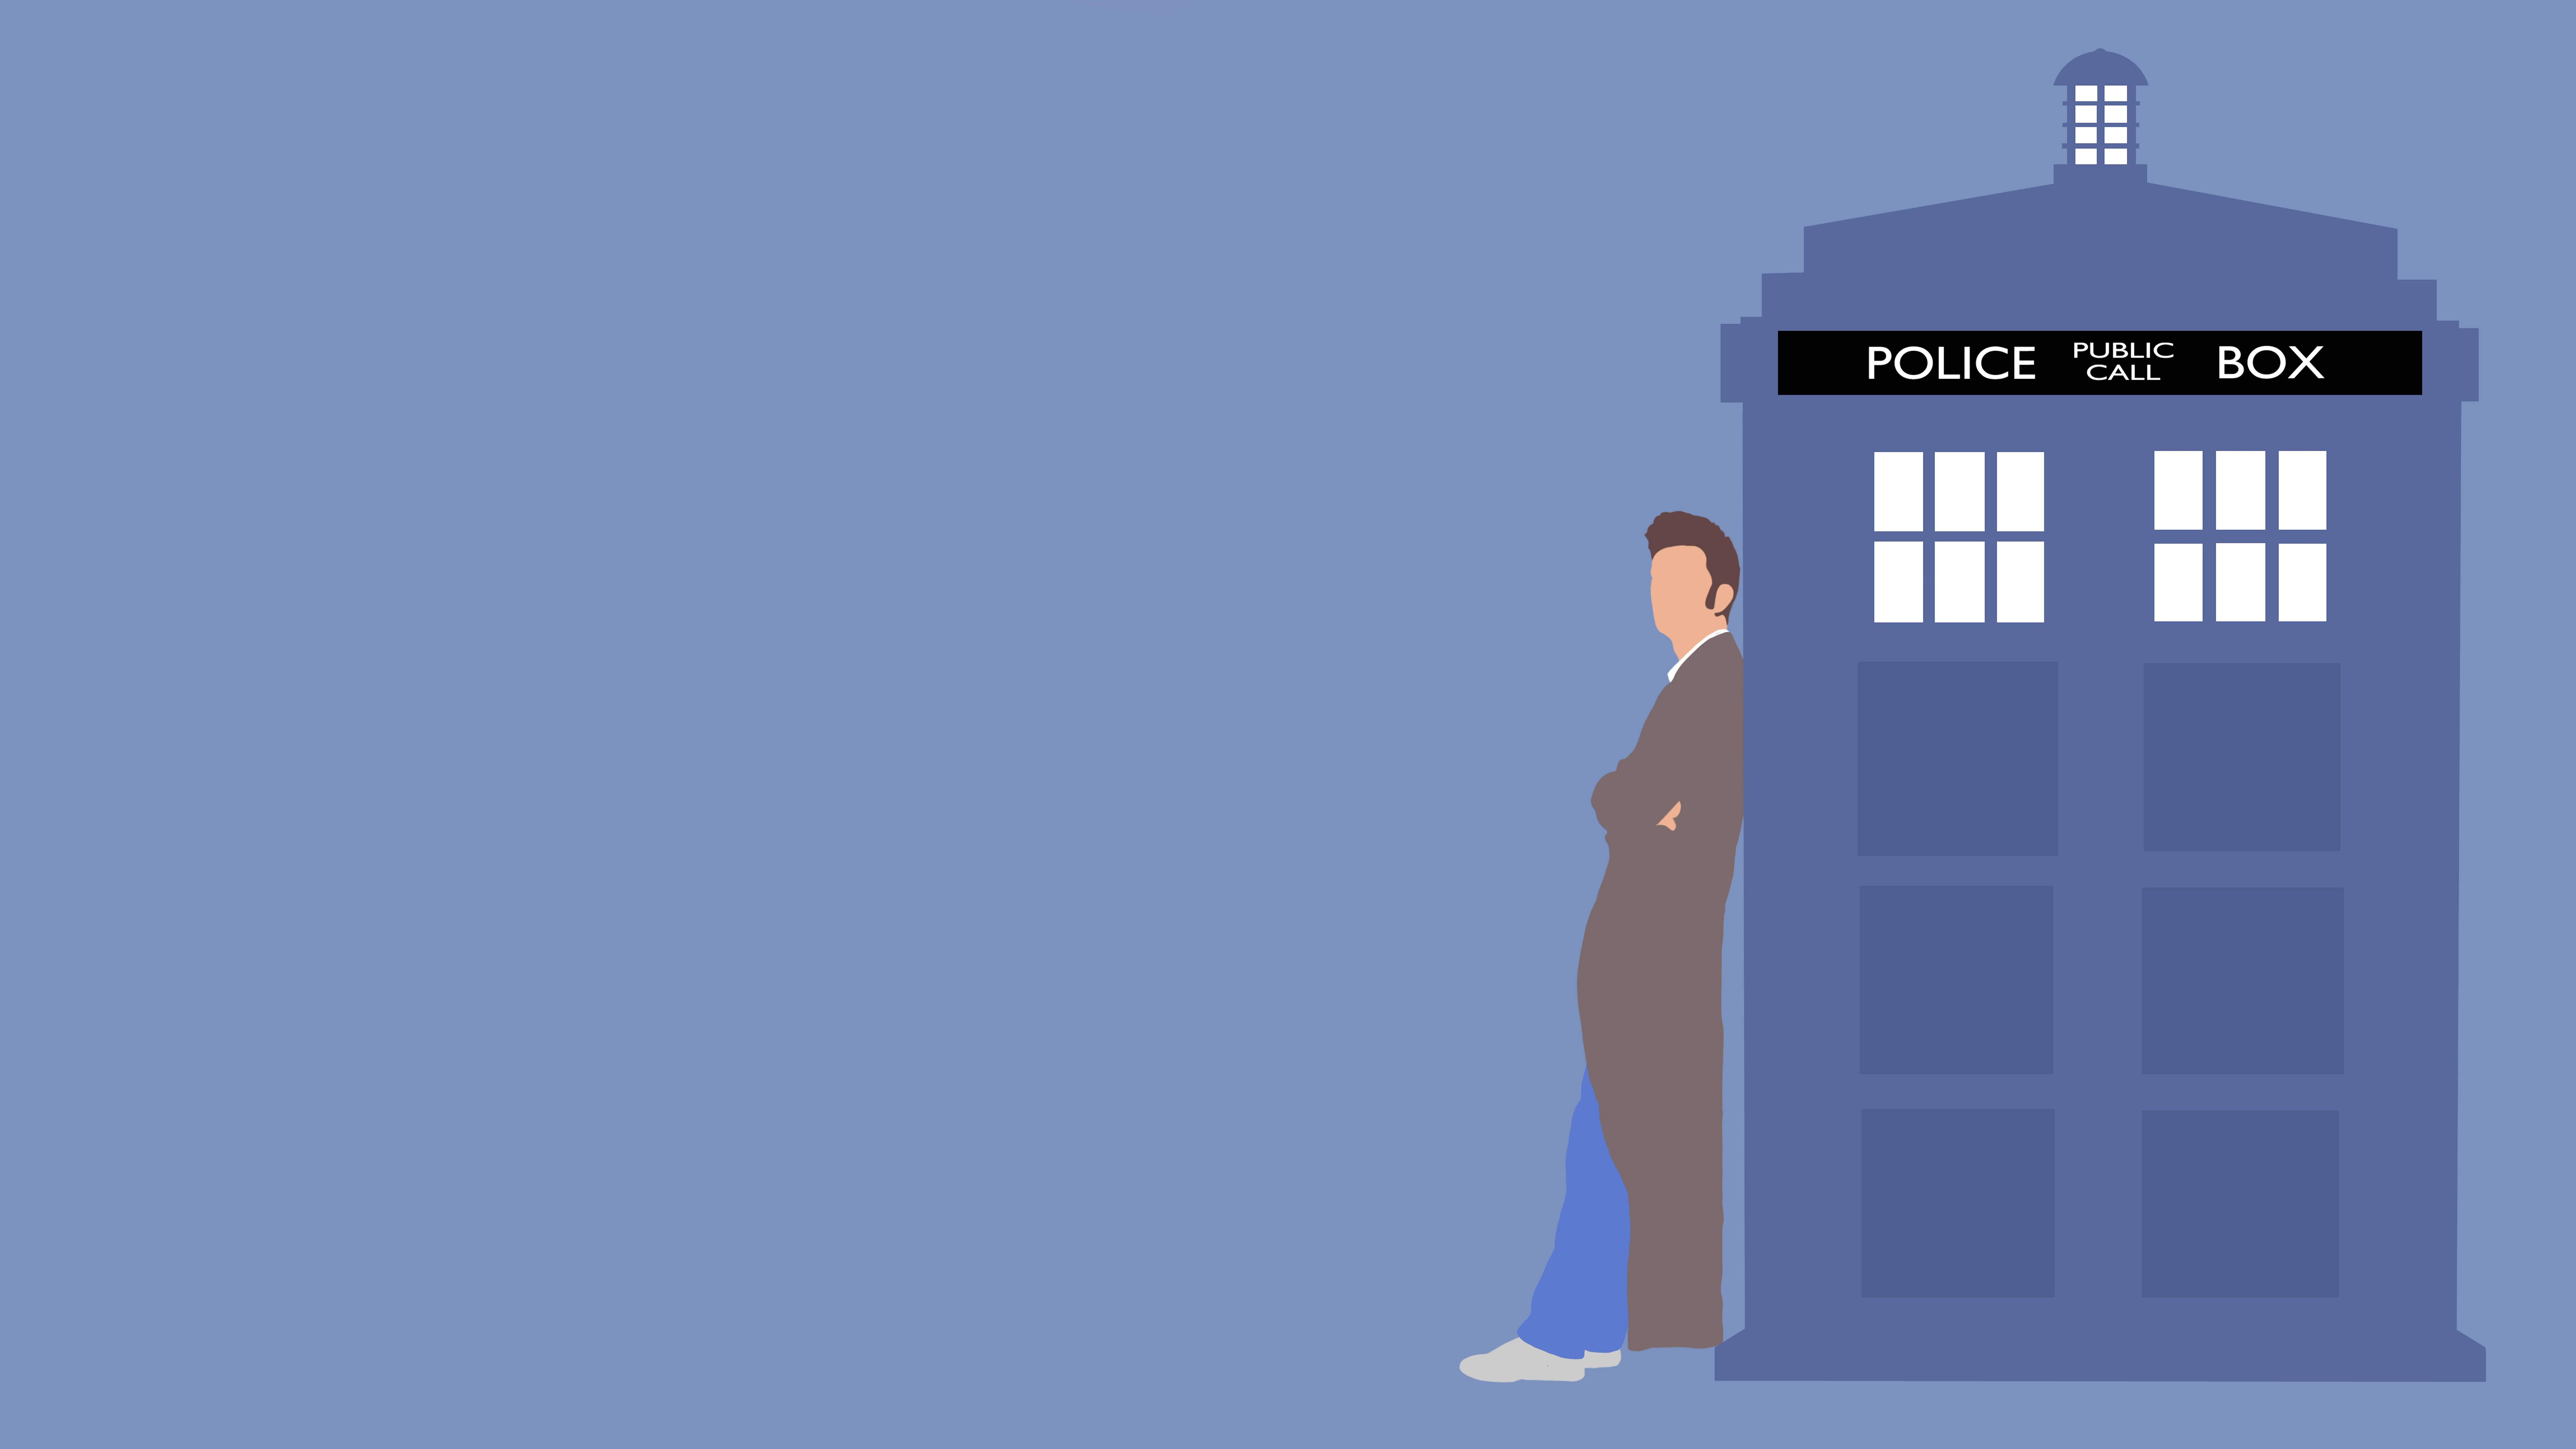 Tenth Doctor And TARDIS Wallpaper [More in Comments]